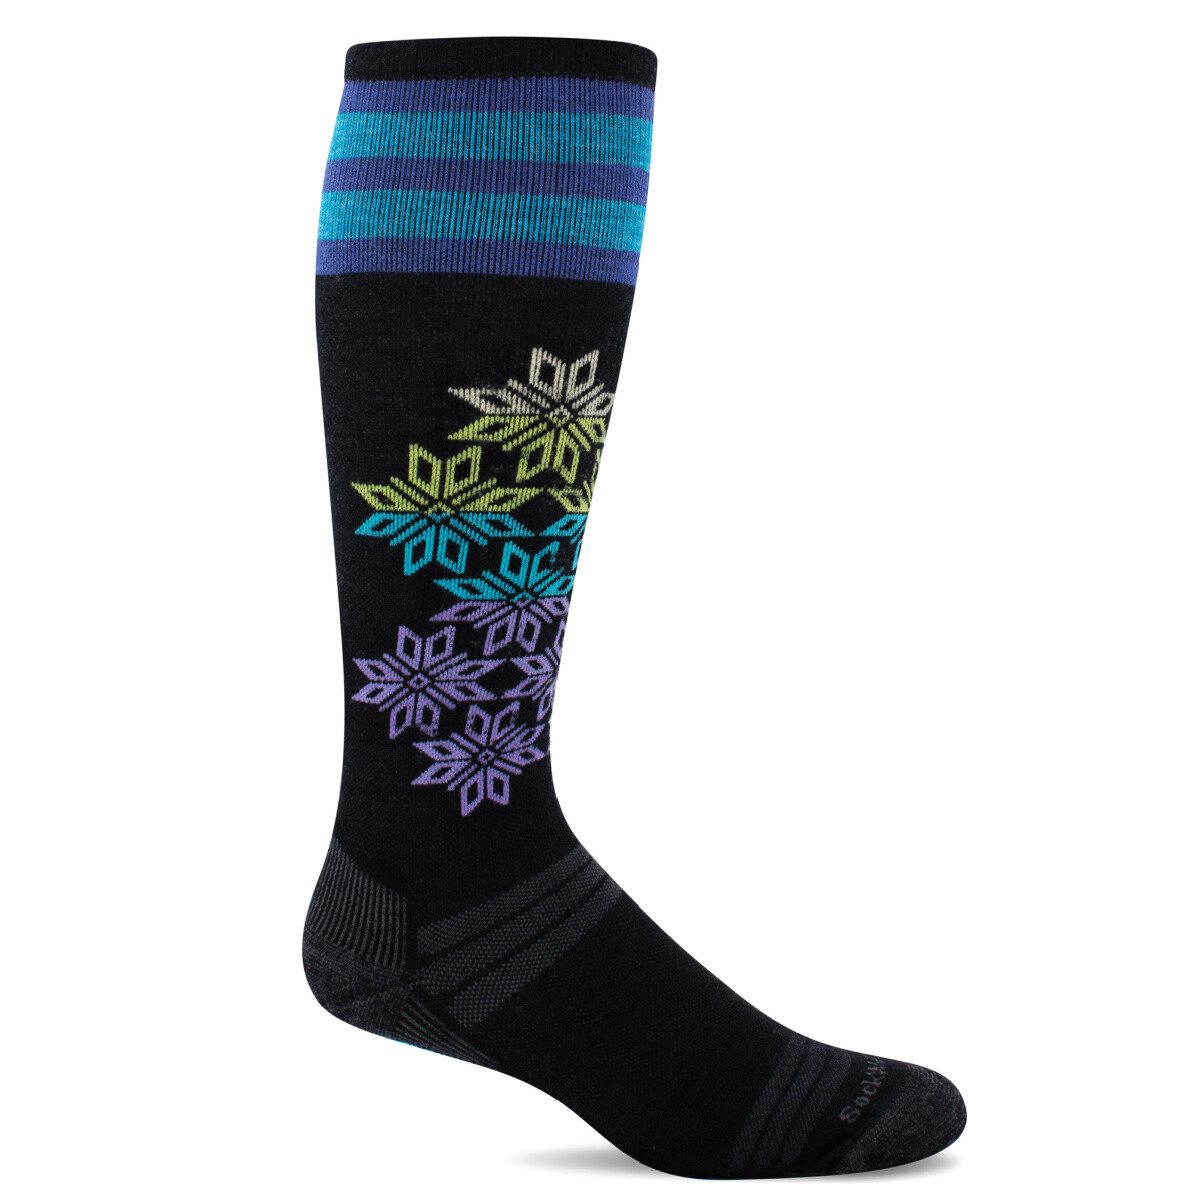 Sockwell Women's Powder Day Moderate Graduated Compression